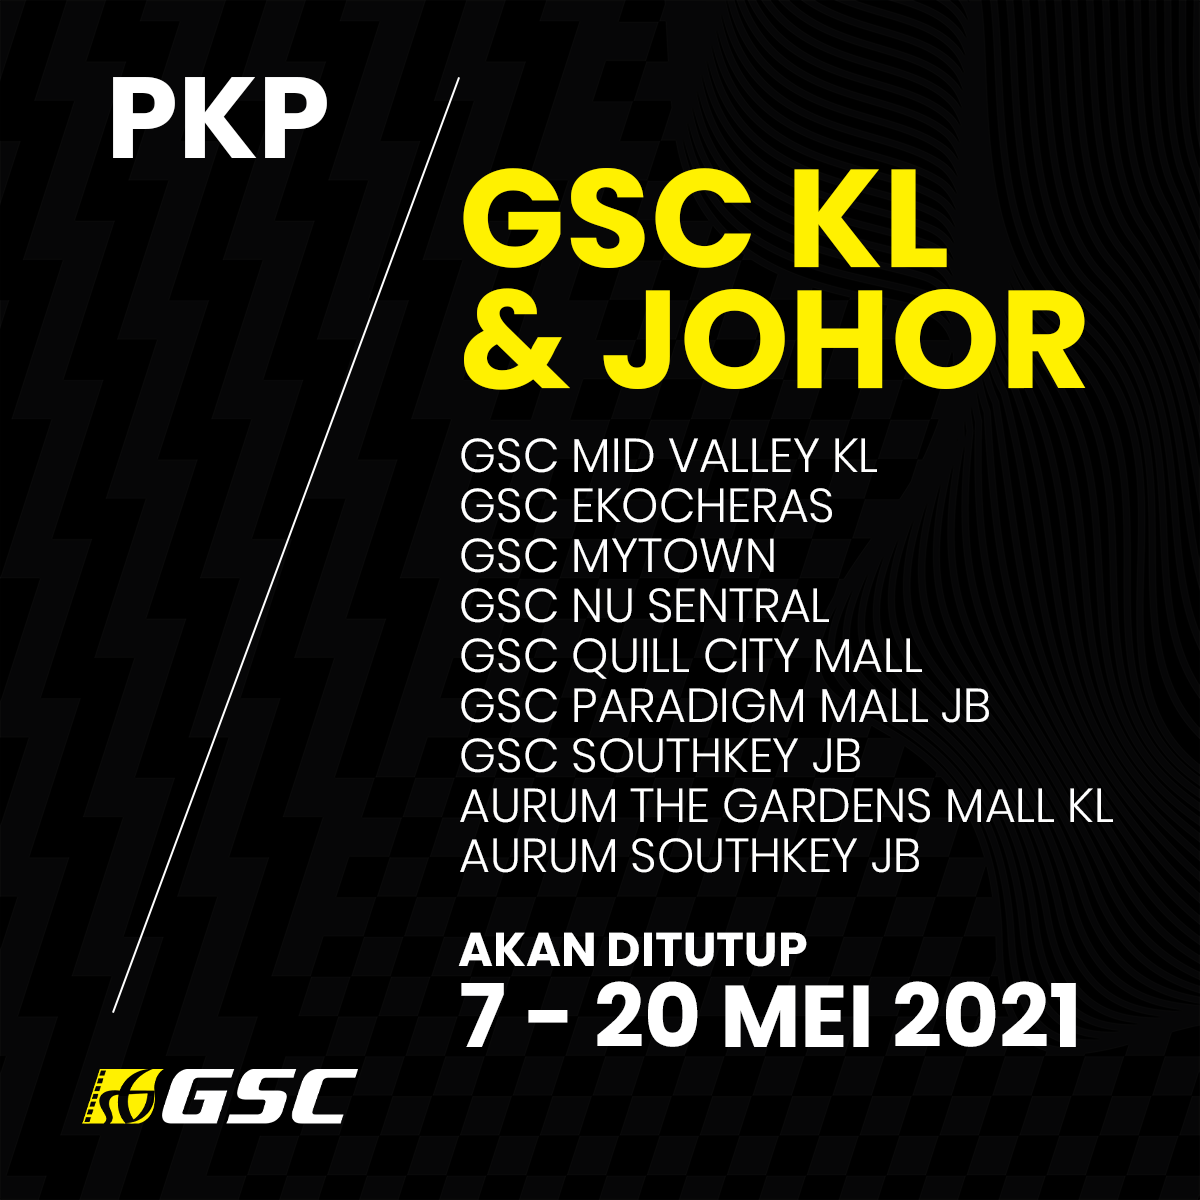 GSC Tutup